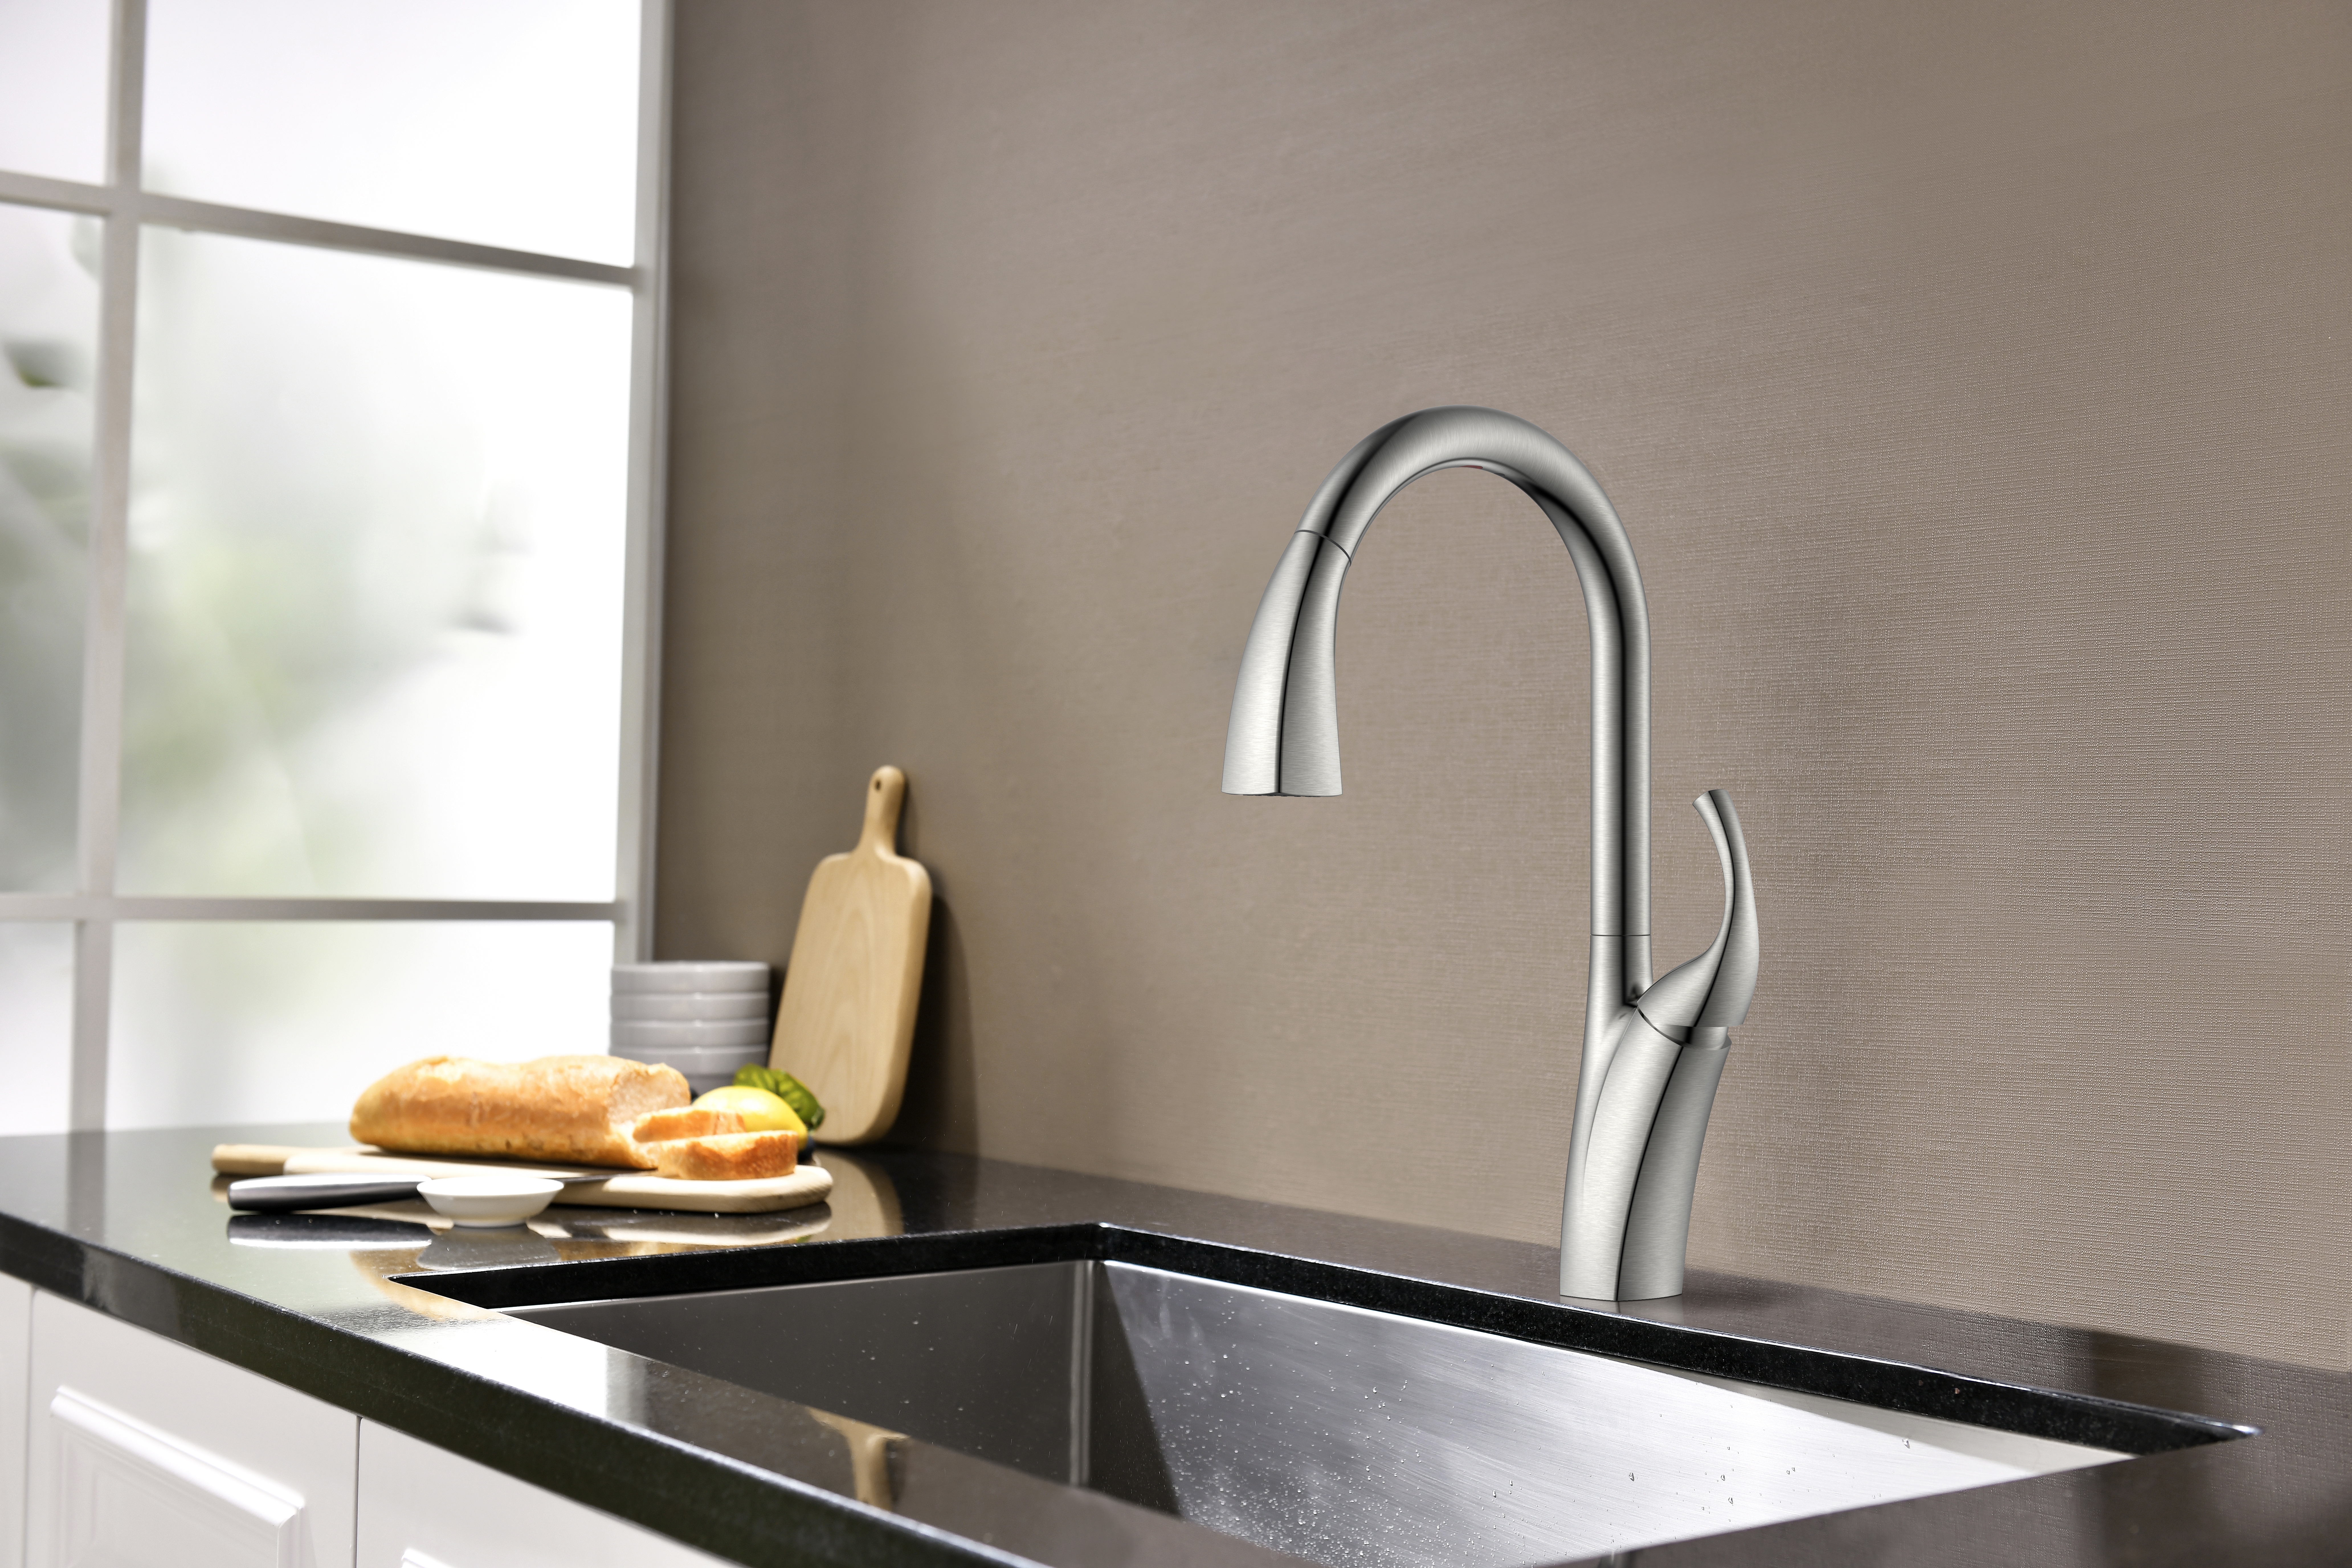 Add Elegance to Your Kitchen With a Gold/Brushed Nickel/Modern Kitchen Faucet